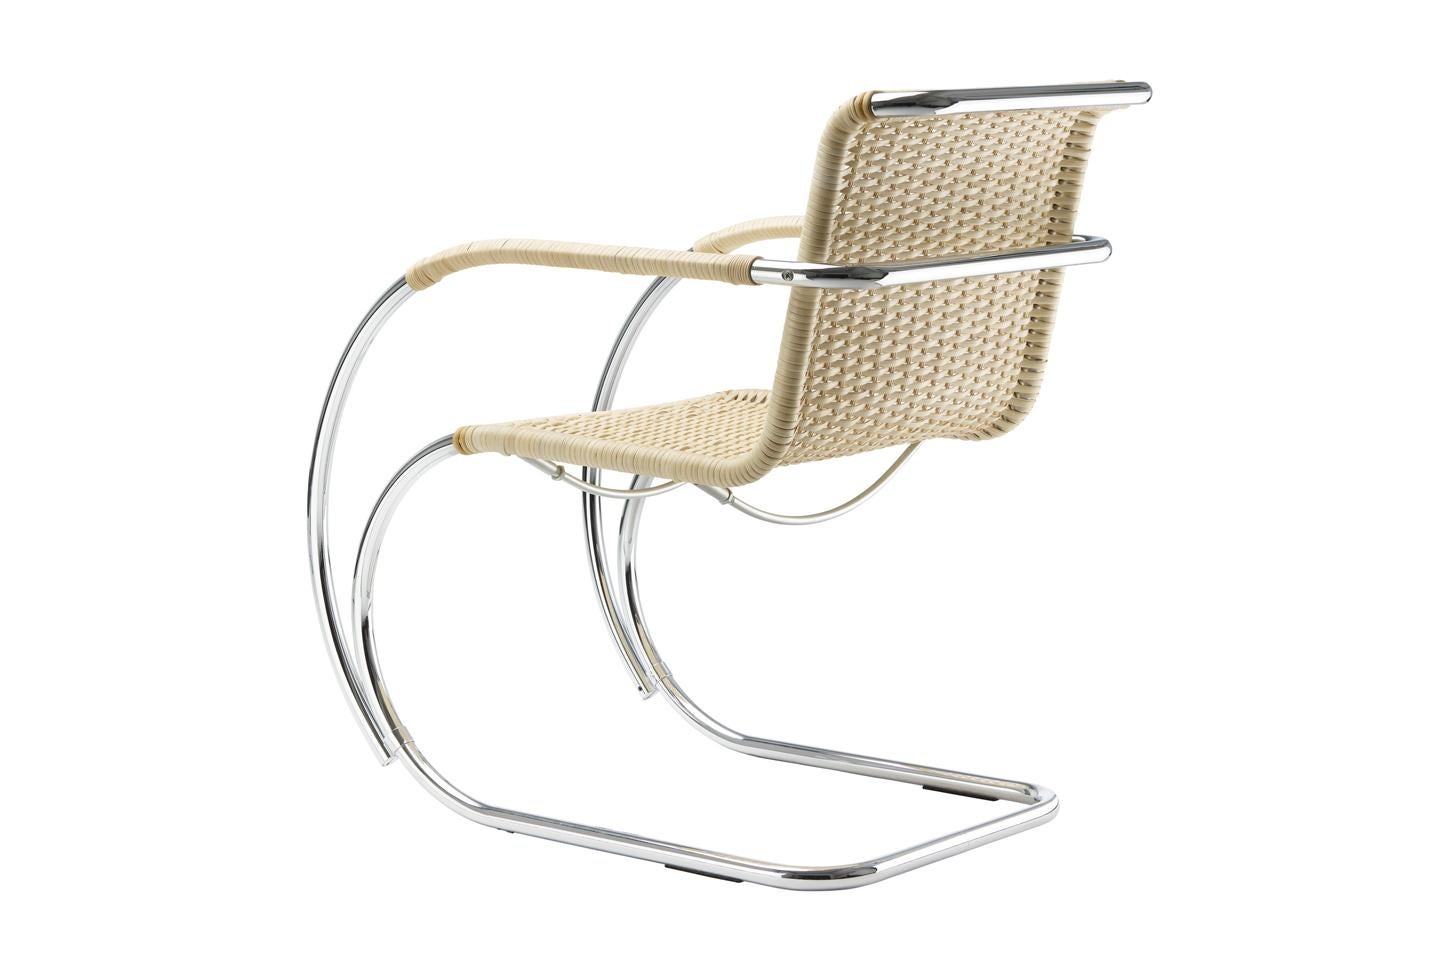 RANGE S 533
Technology becomes furniture; a striking invention becomes an elegant interior design object. Ludwig Mies van der Rohe was the first to provide the cantilever chair with aesthetic lightness and to relate it to its environment with